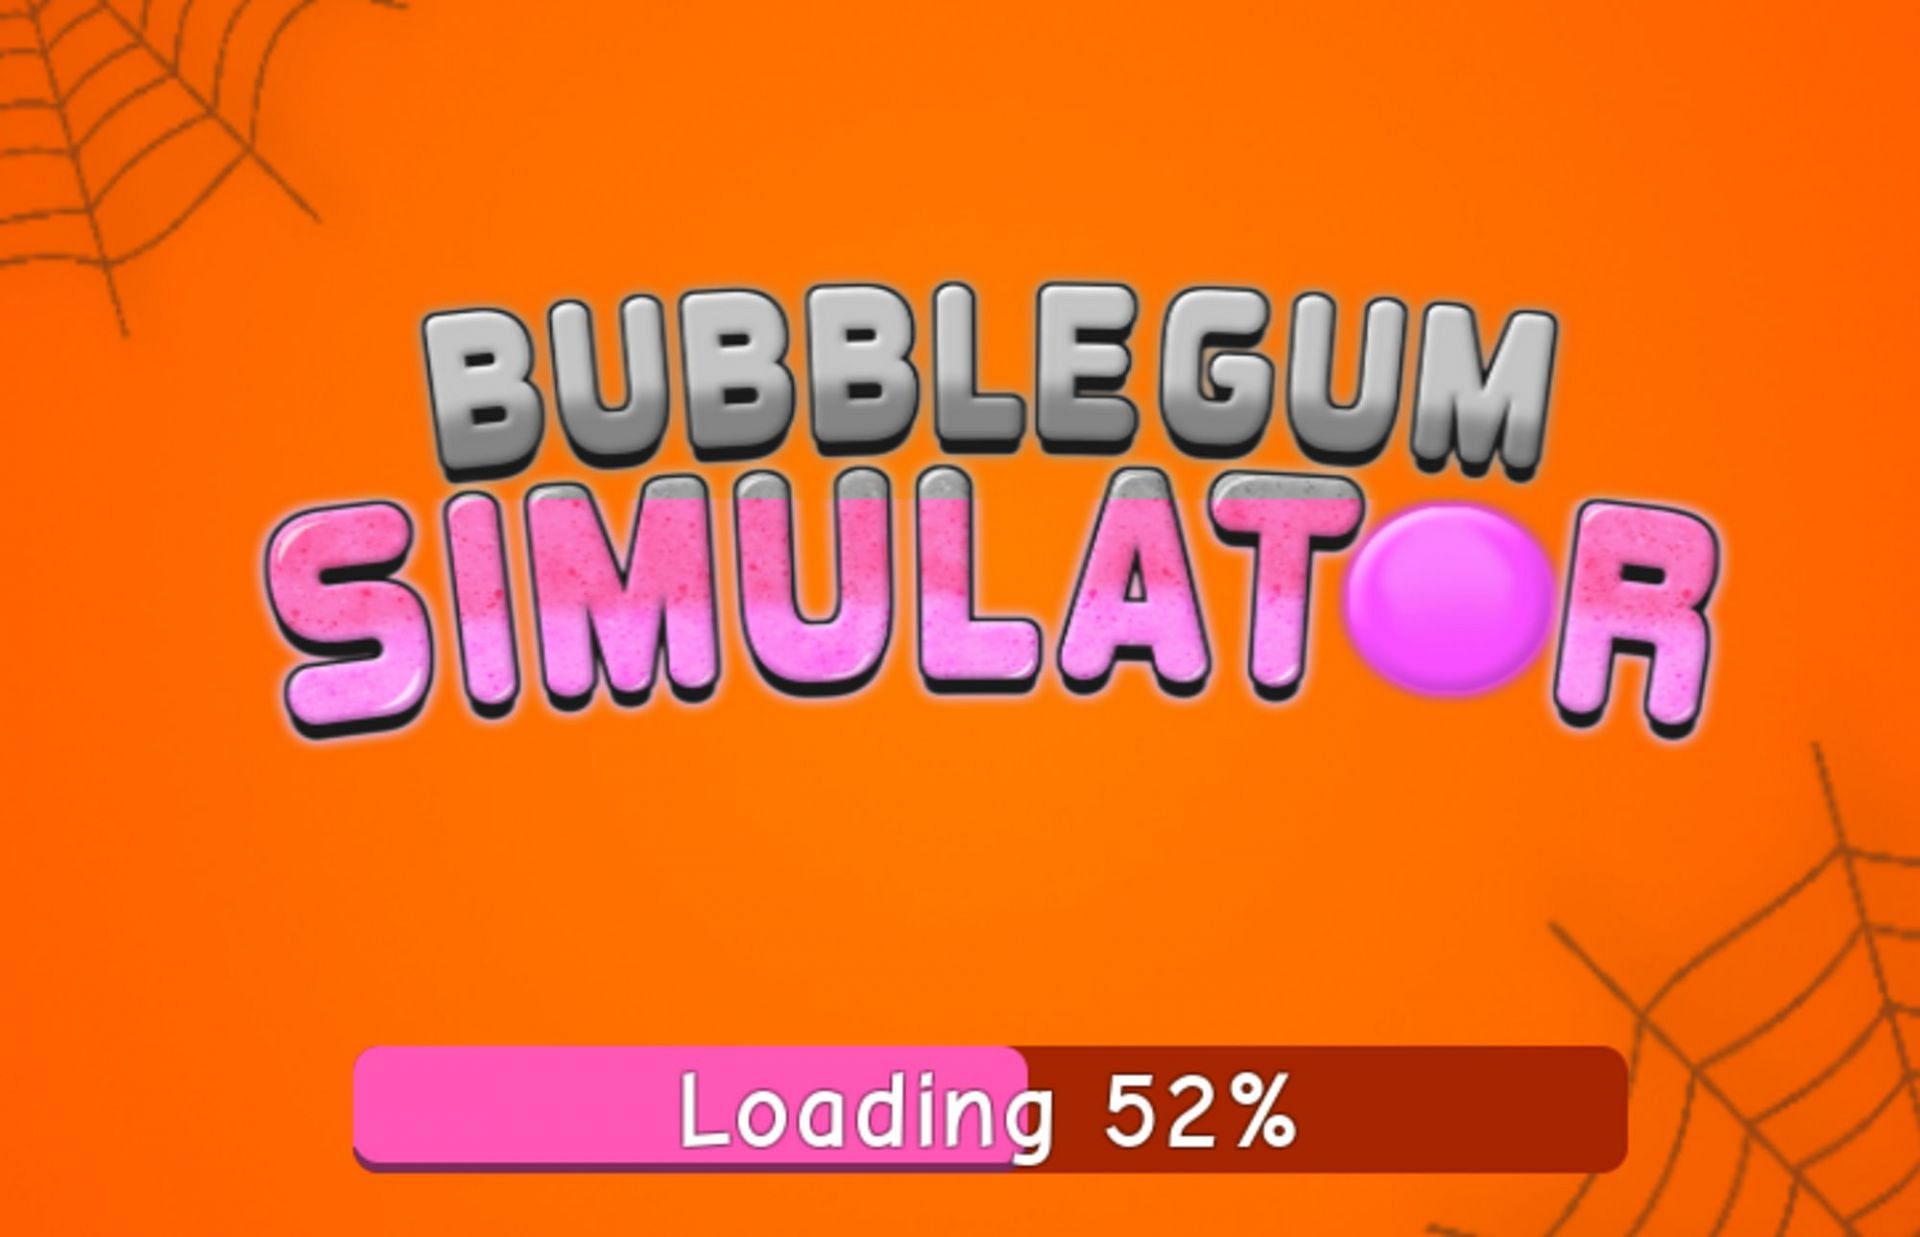 122-roblox-bubble-gum-simulator-codes-may-2023-game-specifications